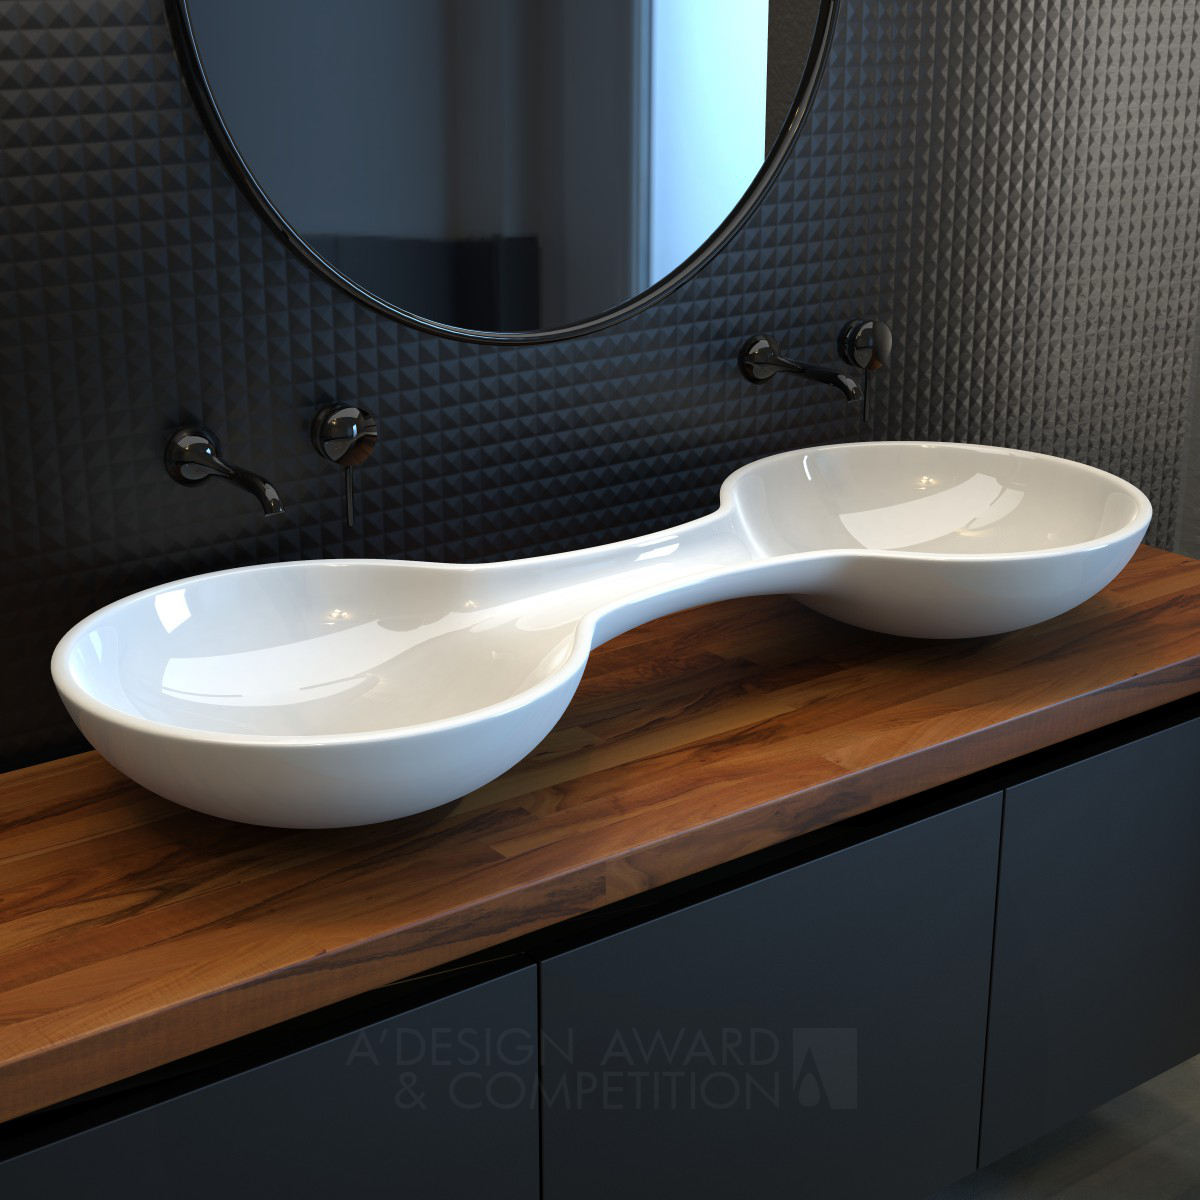 Touch Washbasin by Bulent Unal and Elif Gunes Iron Bathroom Furniture and Sanitary Ware Design Award Winner 2022 